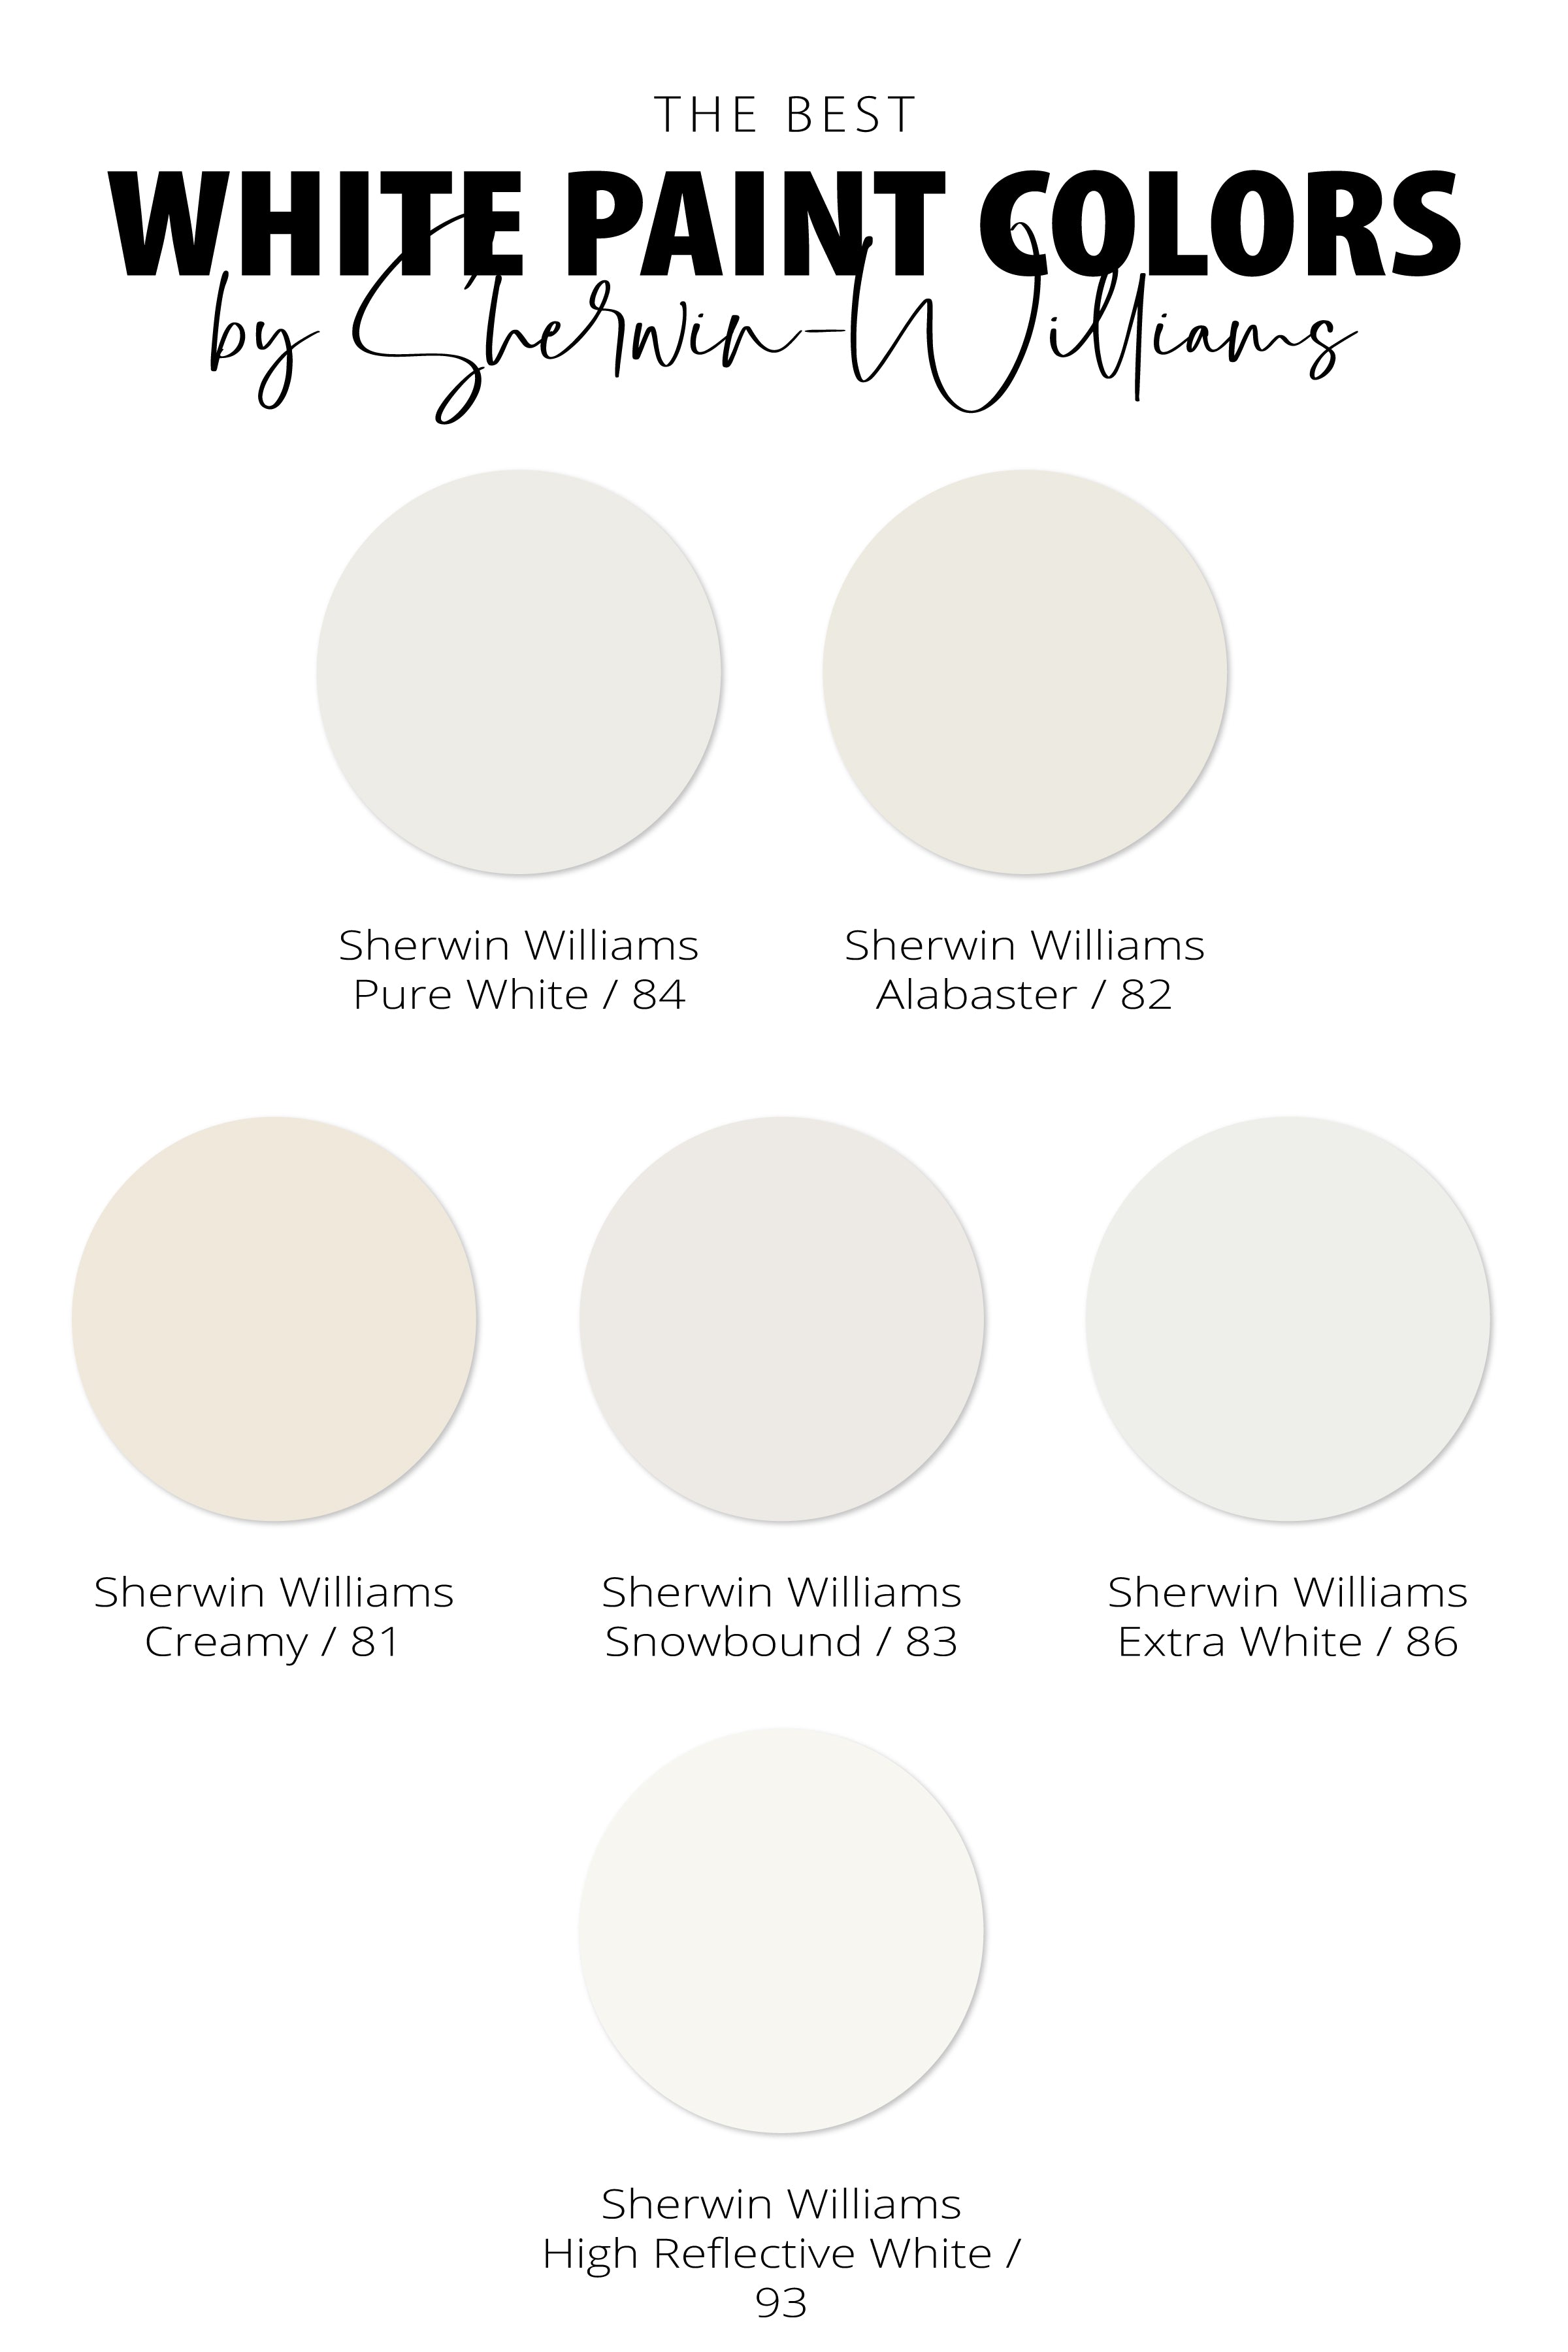 Best-White-Paint-Colors-by-Sherwin-Williams-with-Names-Colors-and-LRV-Values